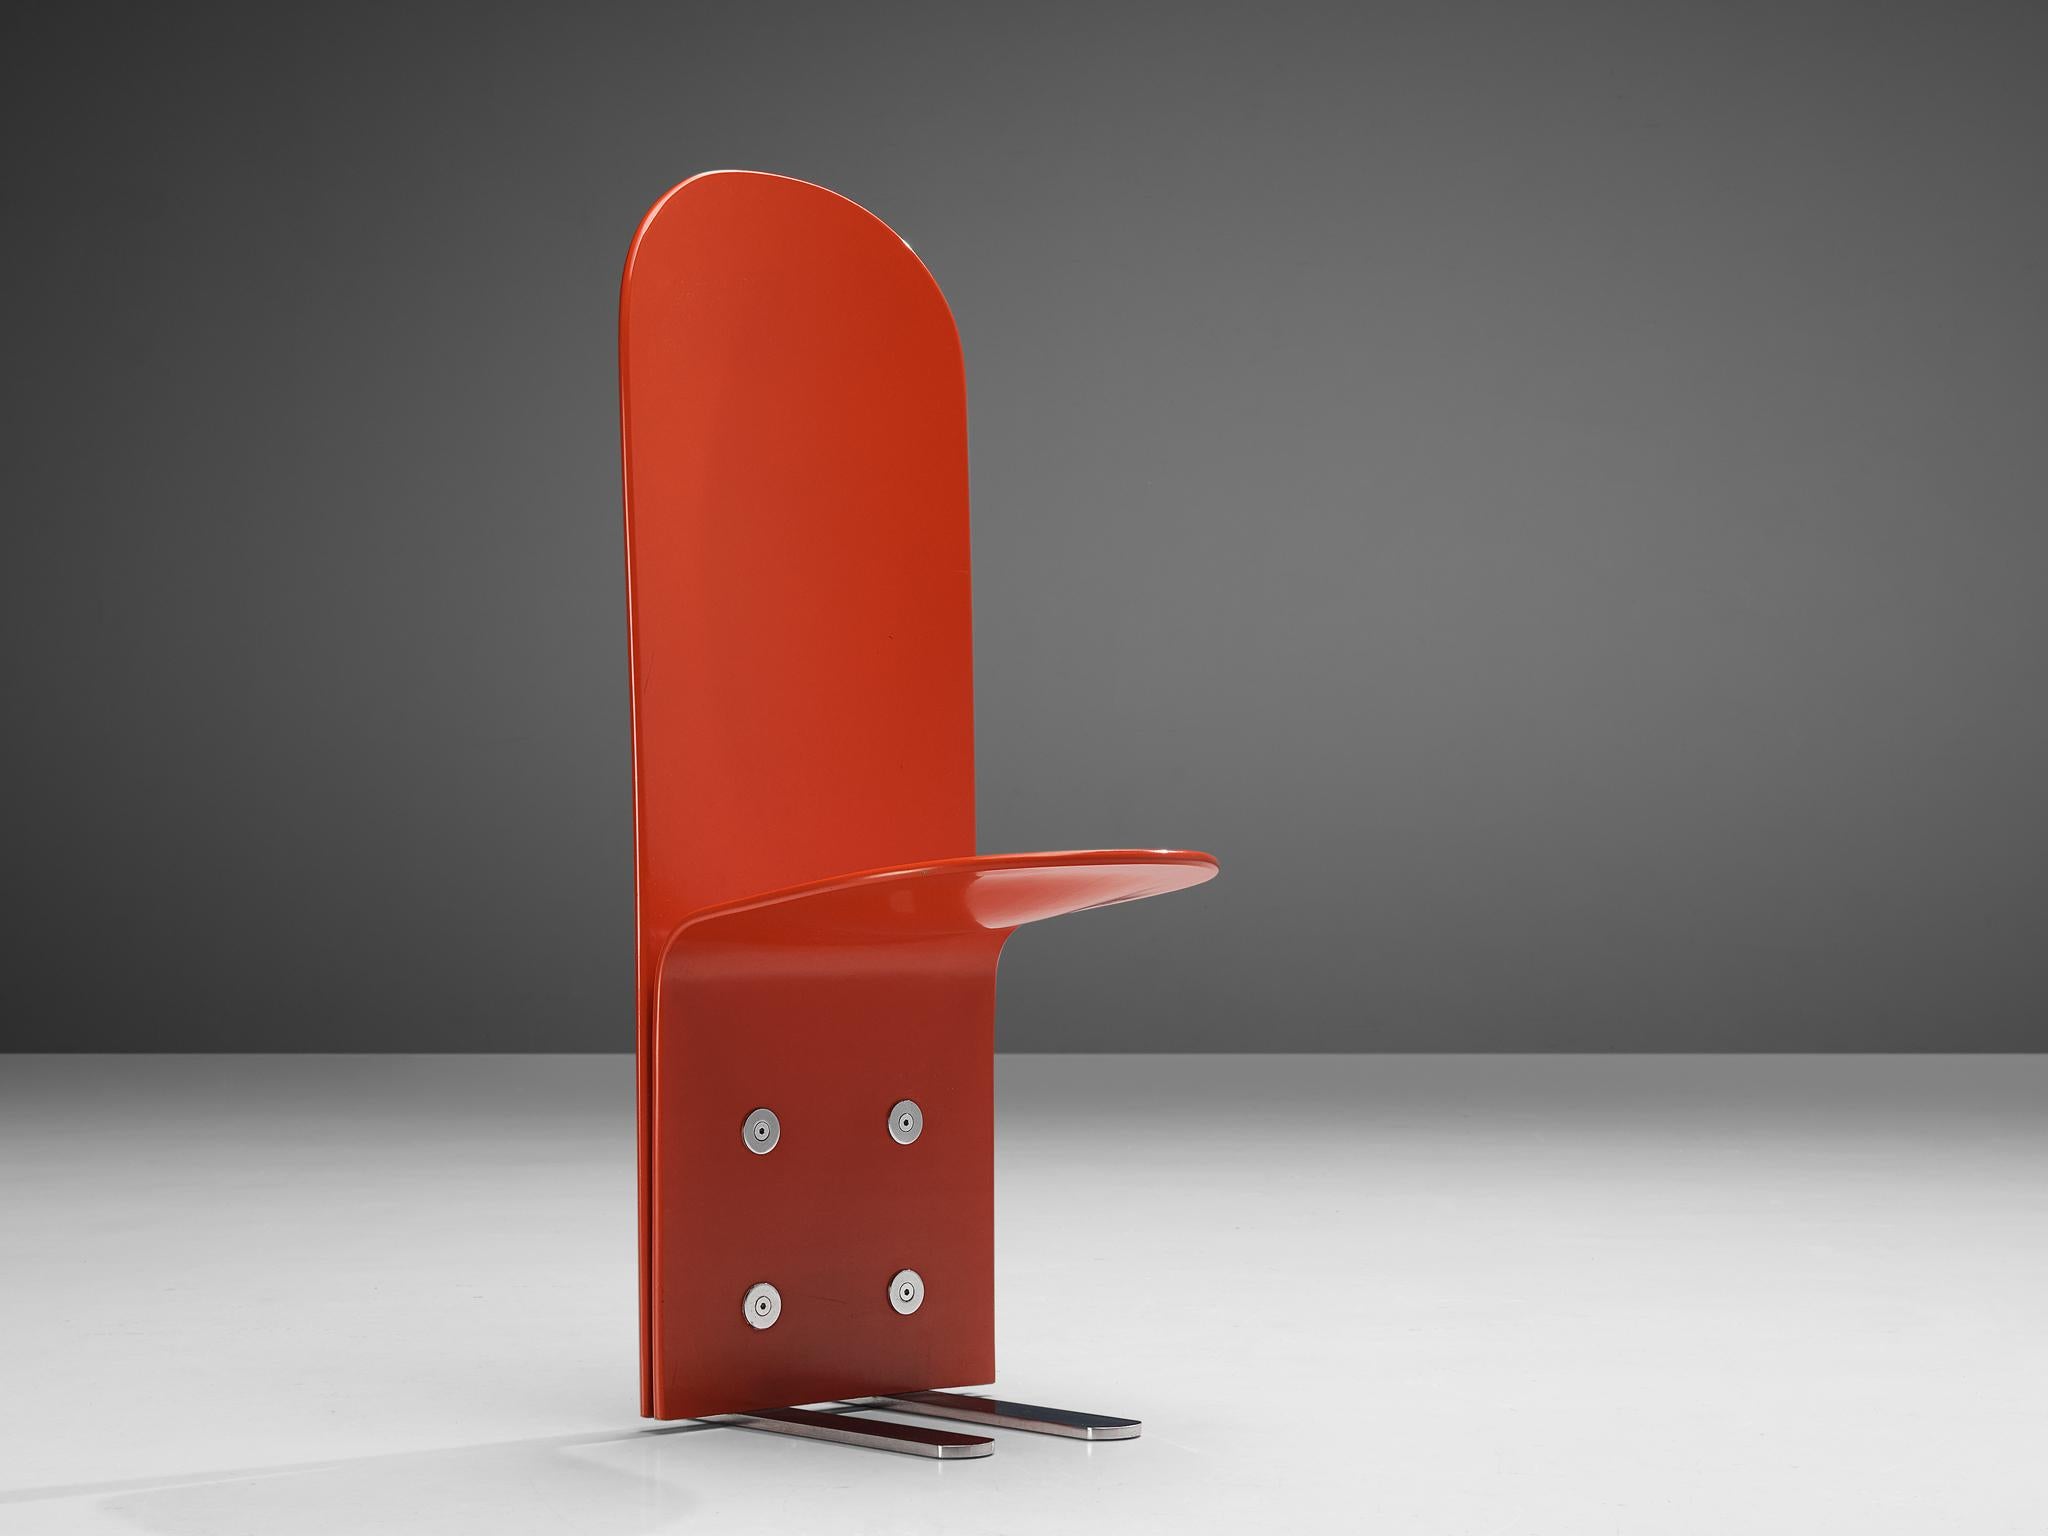 Luigi Saccardo for Arrmet, dining chair, model 'Pelicano', lacquered plywood, chrome-plated metal, 1970s

Eccentric chair executed in red lacquered plywood. The remarkable high back gives this chair a stately appearance. Its simplistic frame